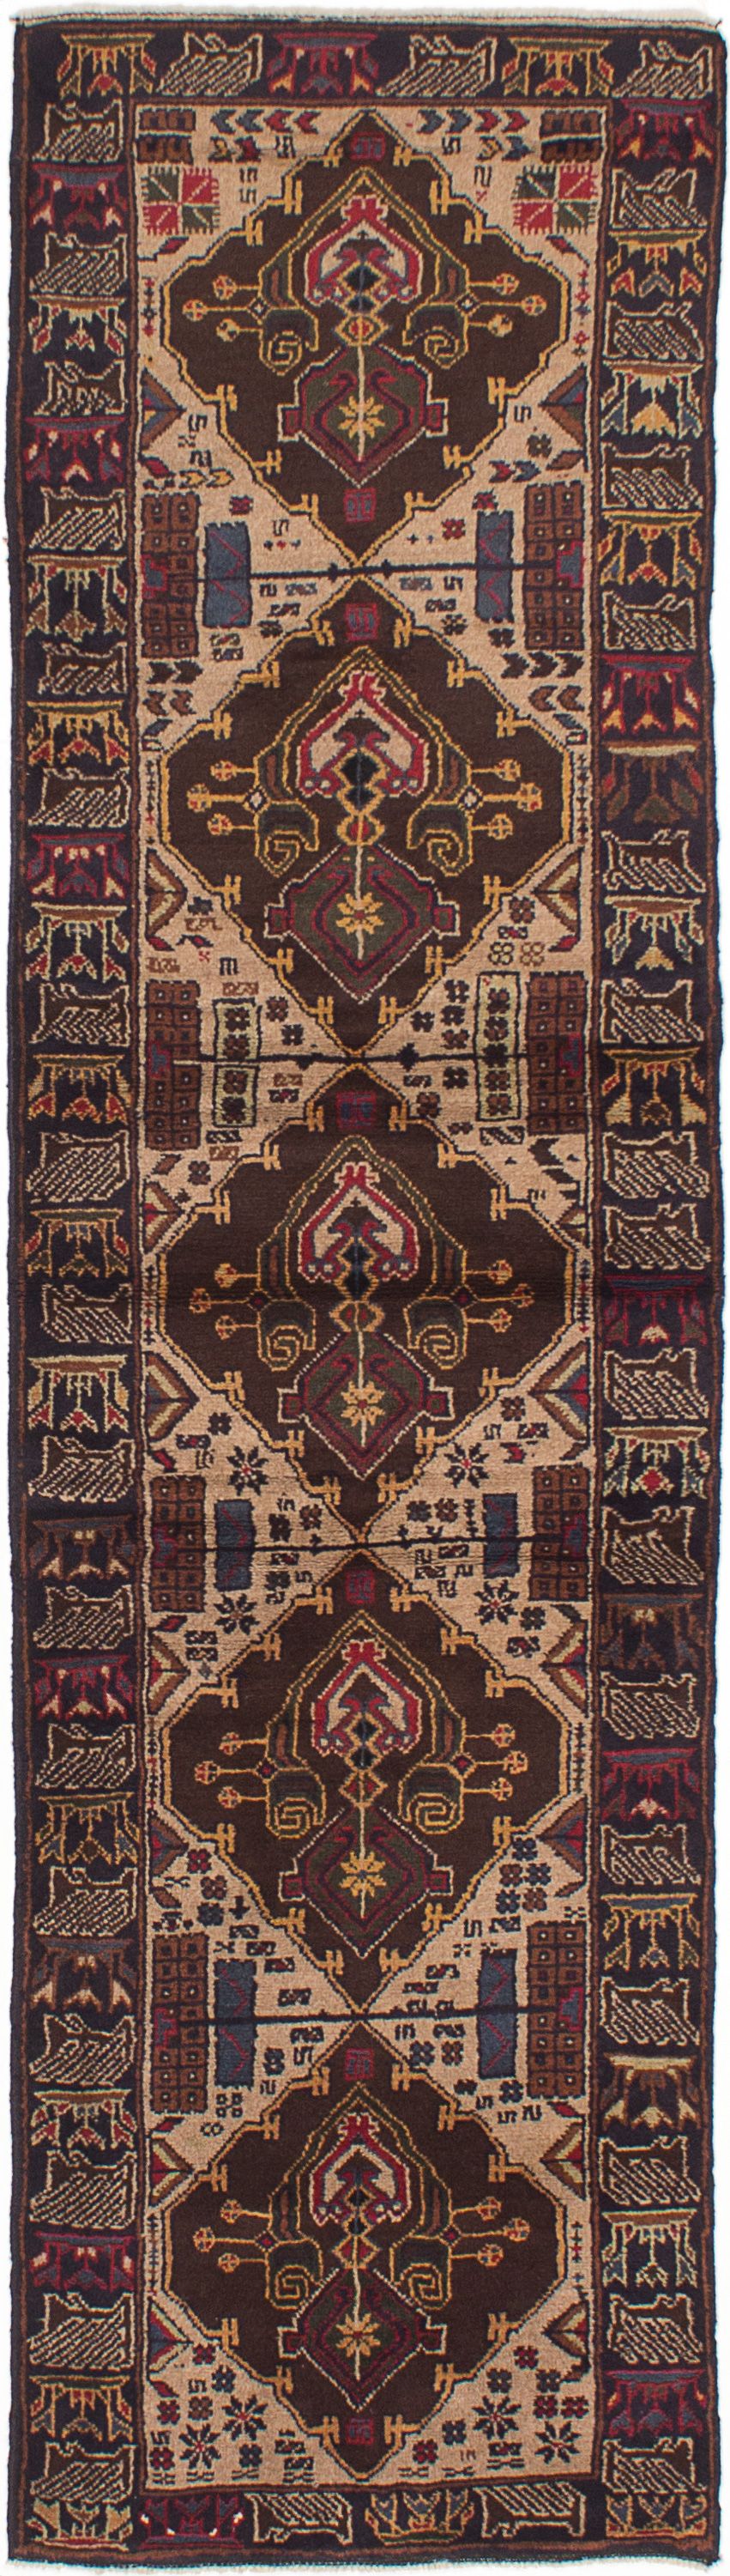 Hand-knotted Royal Baluch Cream Wool Rug 2'9" x 9'11" Size: 2'9" x 9'11"  